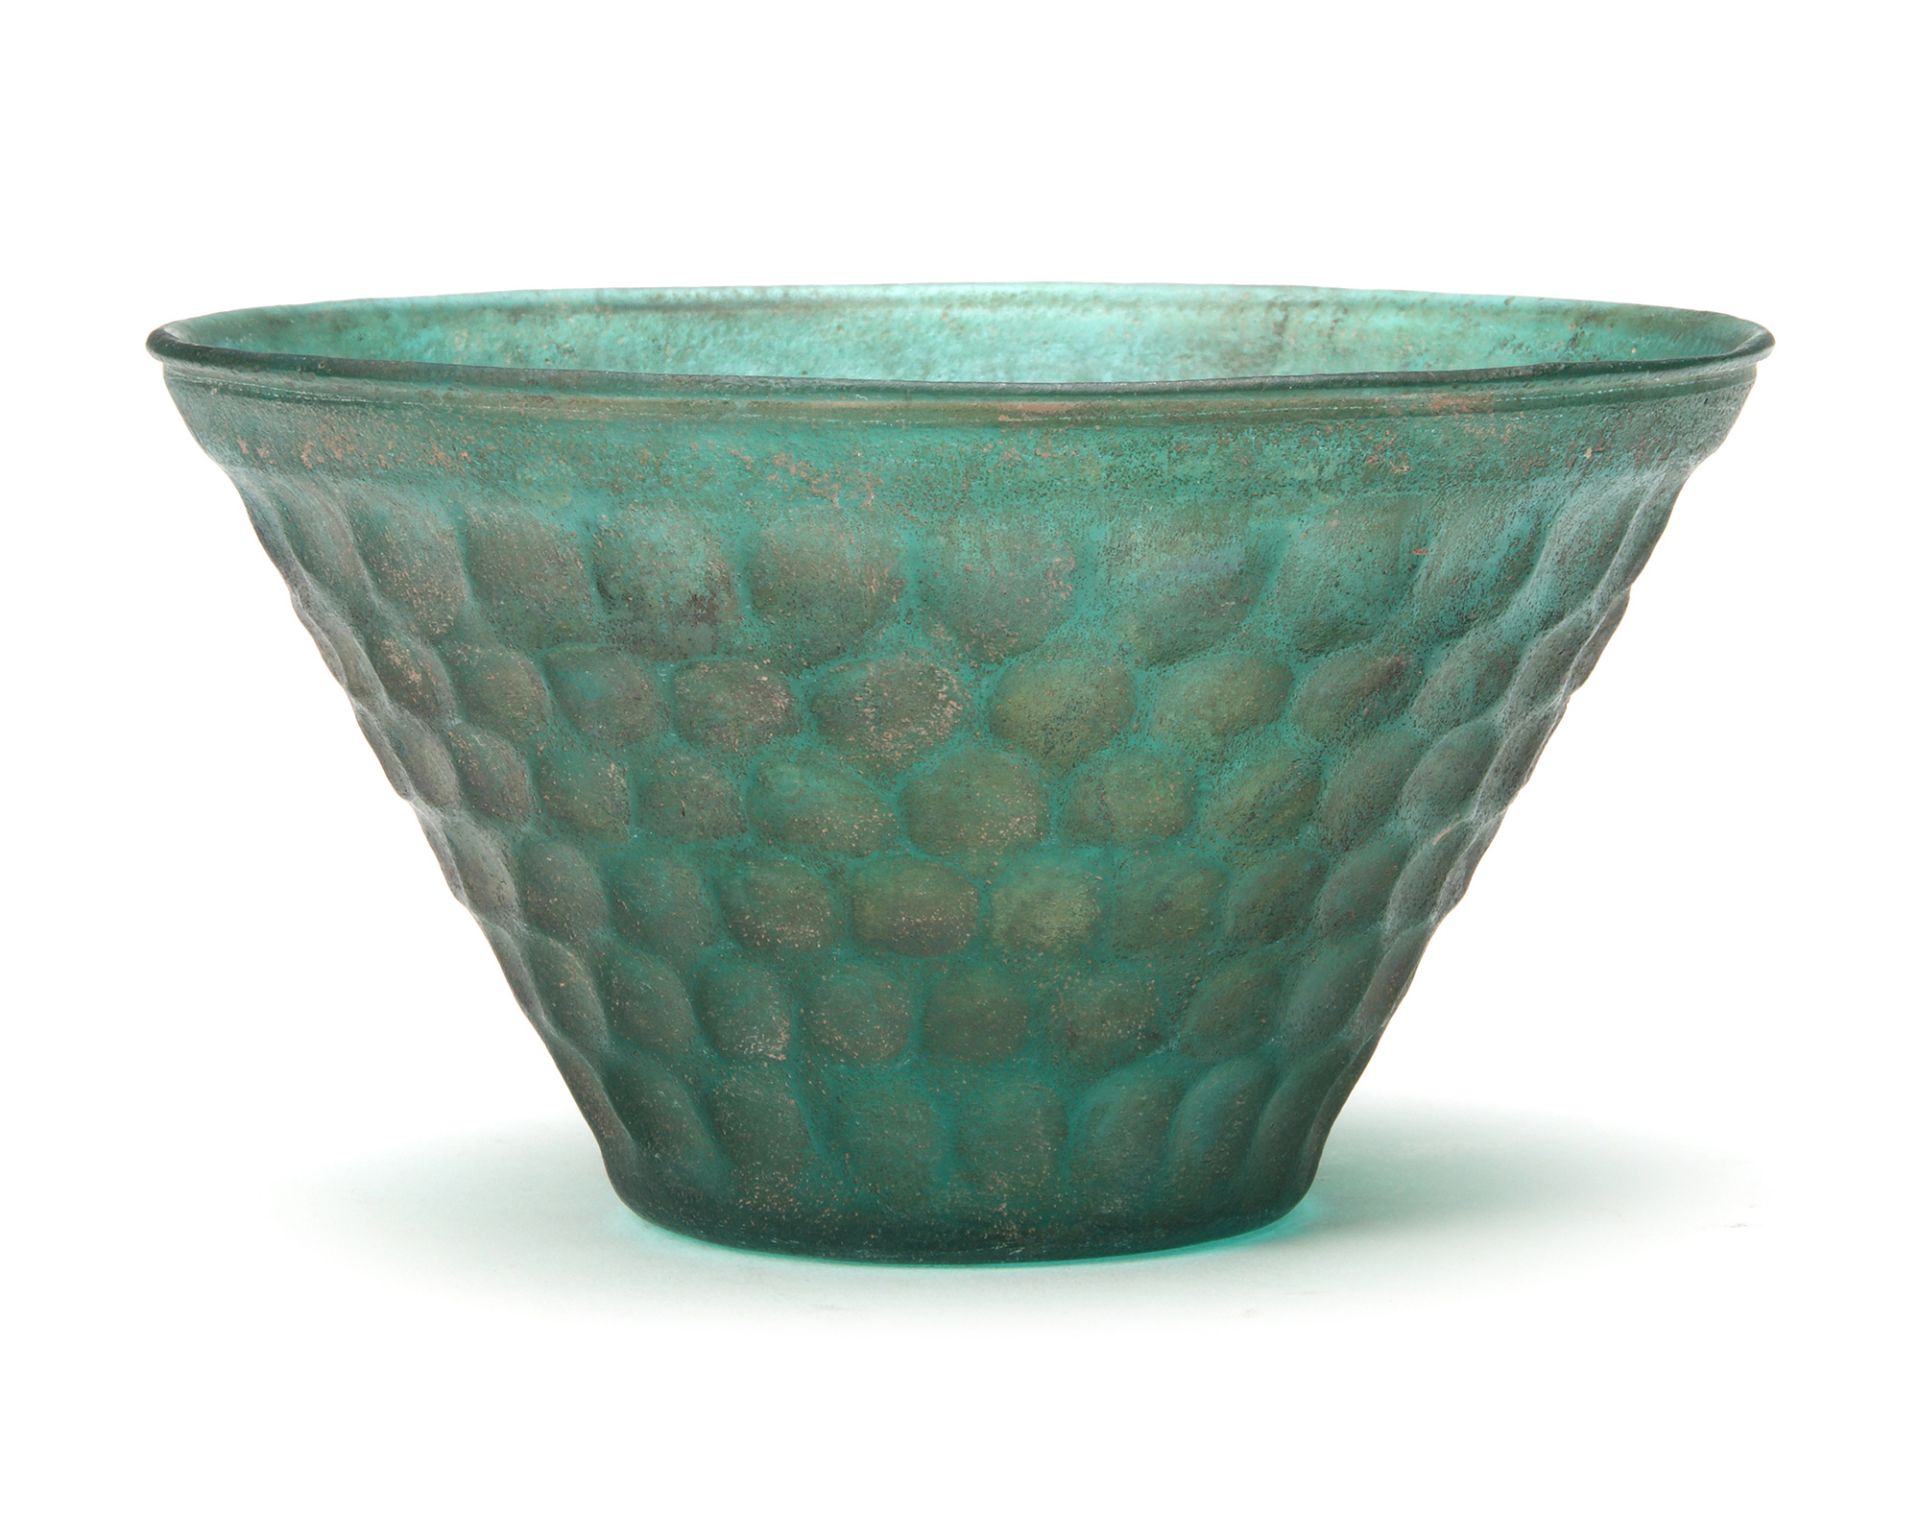 A PERSIAN GREEN CUT GLASS BOWL, 8TH-9TH CENTURY - Image 4 of 10